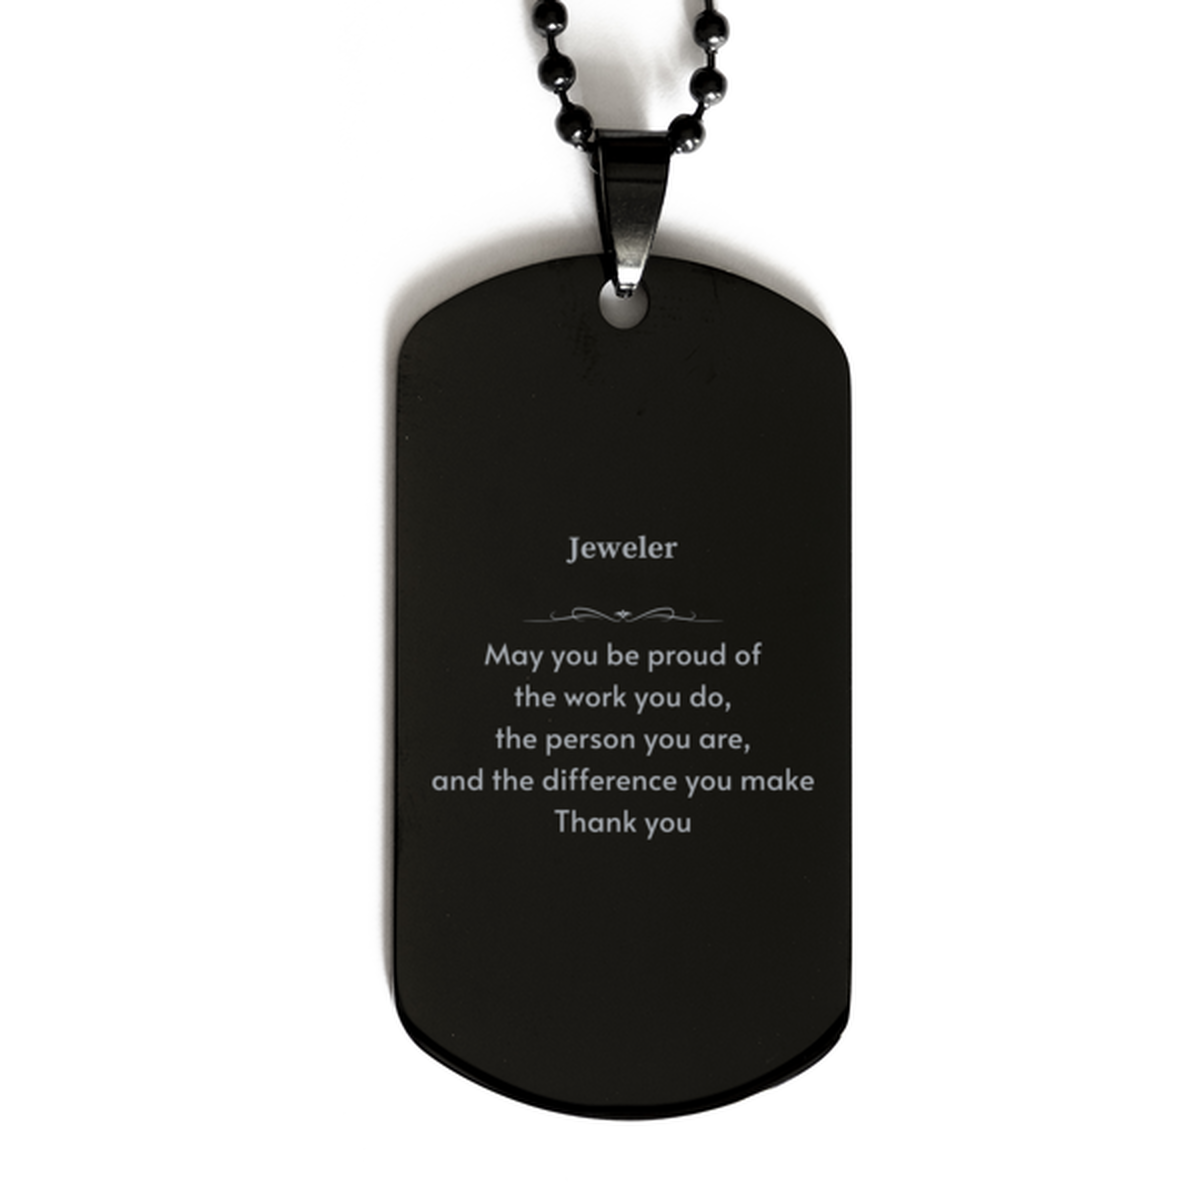 Heartwarming Black Dog Tag Retirement Coworkers Gifts for Jeweler, Jeweler May You be proud of the work you do, the person you are Gifts for Boss Men Women Friends